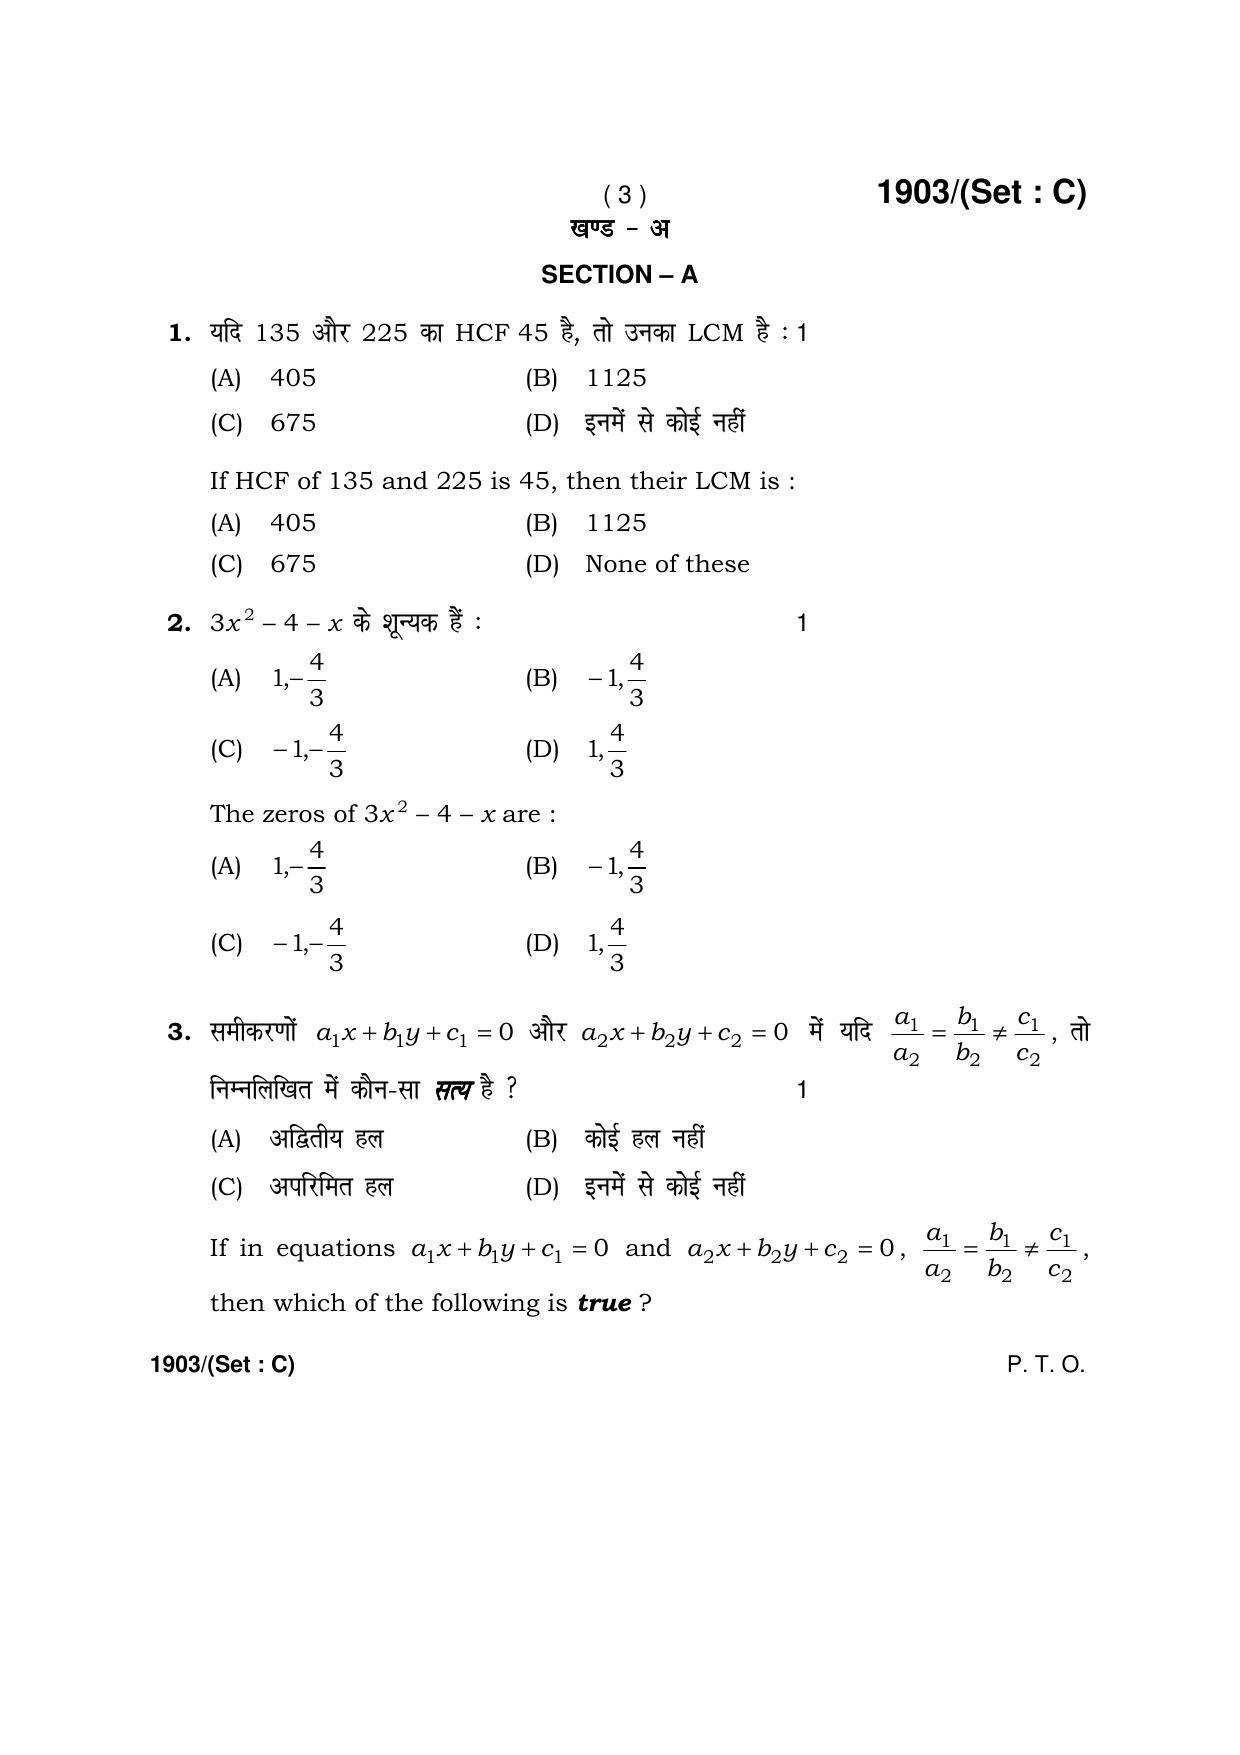 Haryana Board HBSE Class 10 Mathematics -C 2017 Question Paper - Page 3